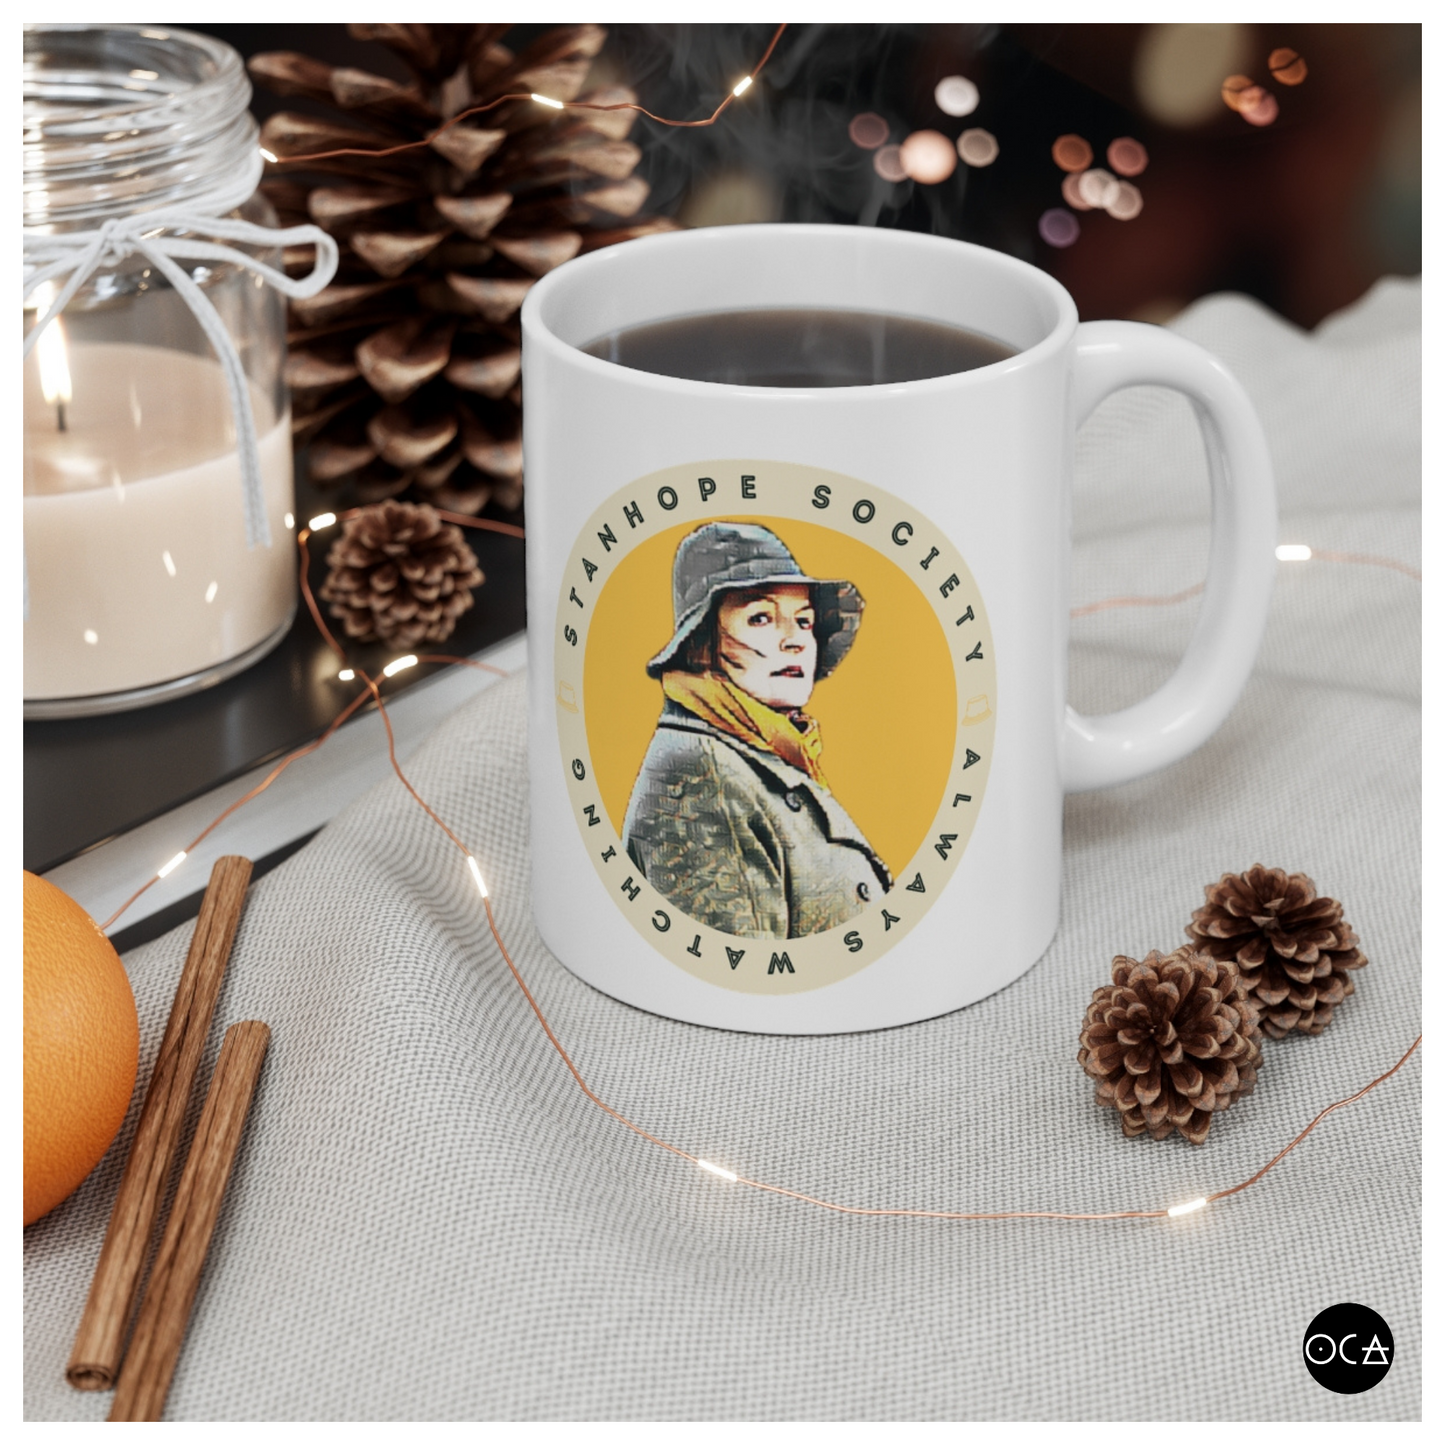 Vera Stanhope Society Mug Inspired by Vera Stanhope DCI (Doublesided/2 different size options)